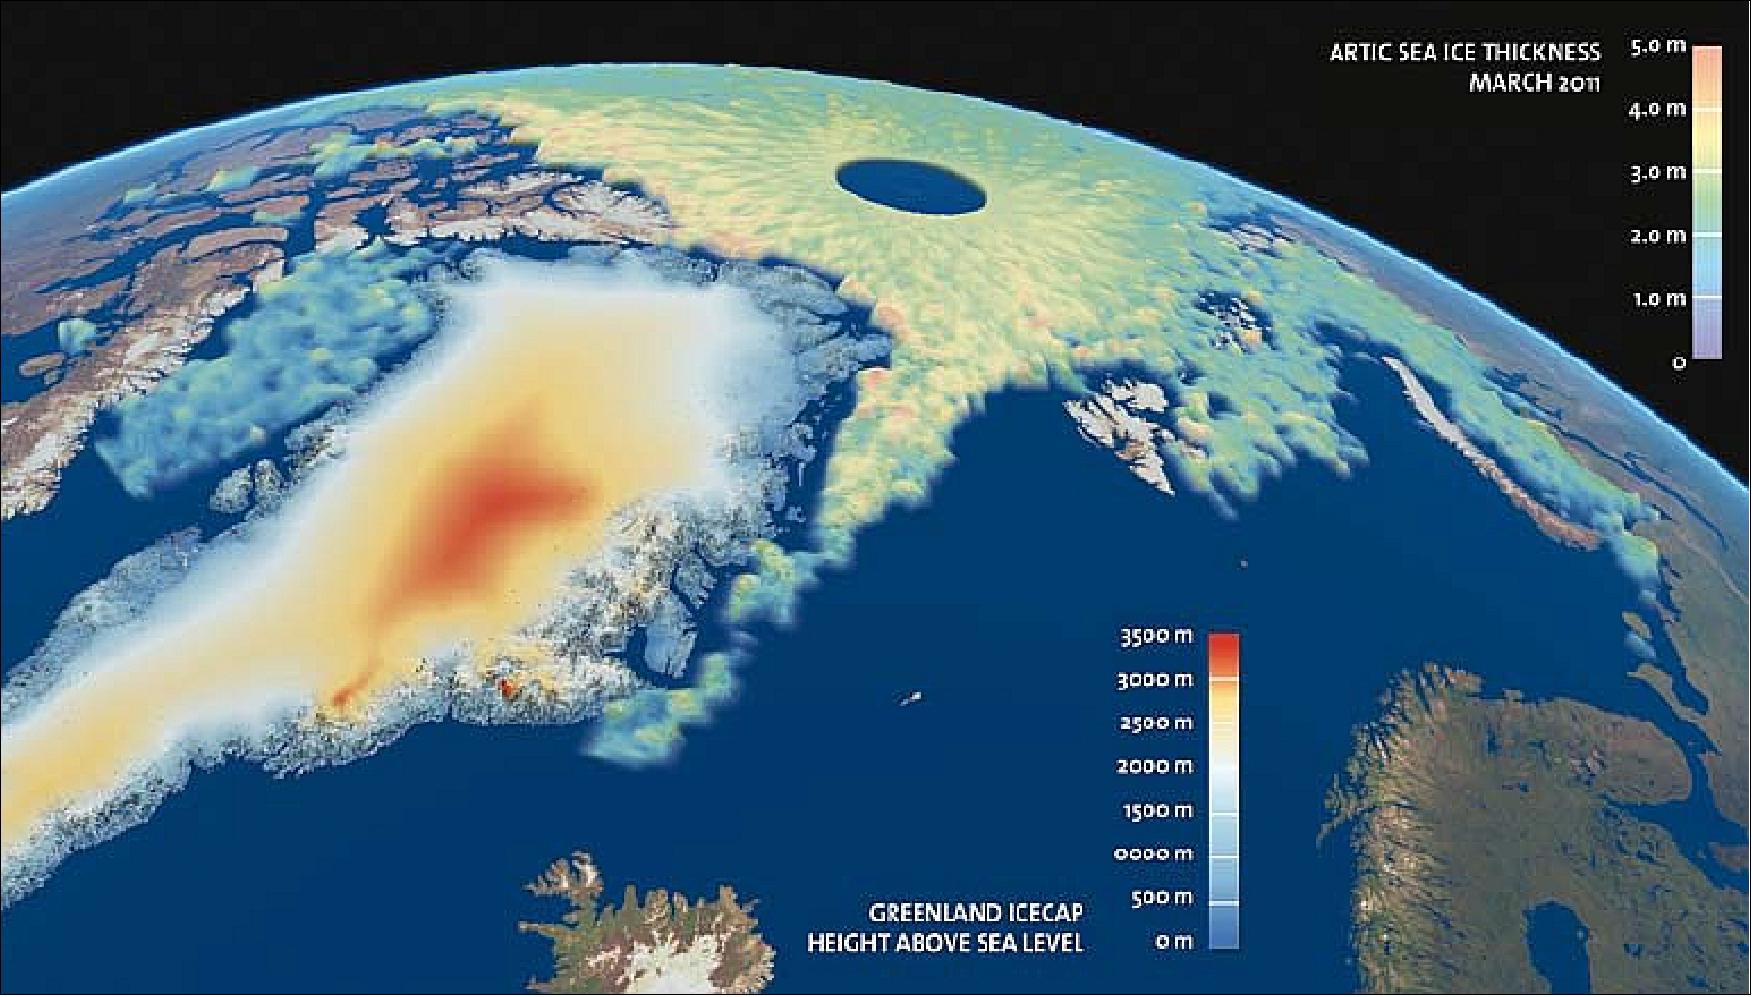 Figure 88: Produced from CryoSat-2 data, this map shows Arctic sea-ice thickness, as well as the elevation of Greenland ice sheet, for March 2011. For sea ice, green indicates thinner ice, while yellow and orange indicate thicker ice (image credit: CPOM/UCL/Leeds/ESA/PVL) 111)